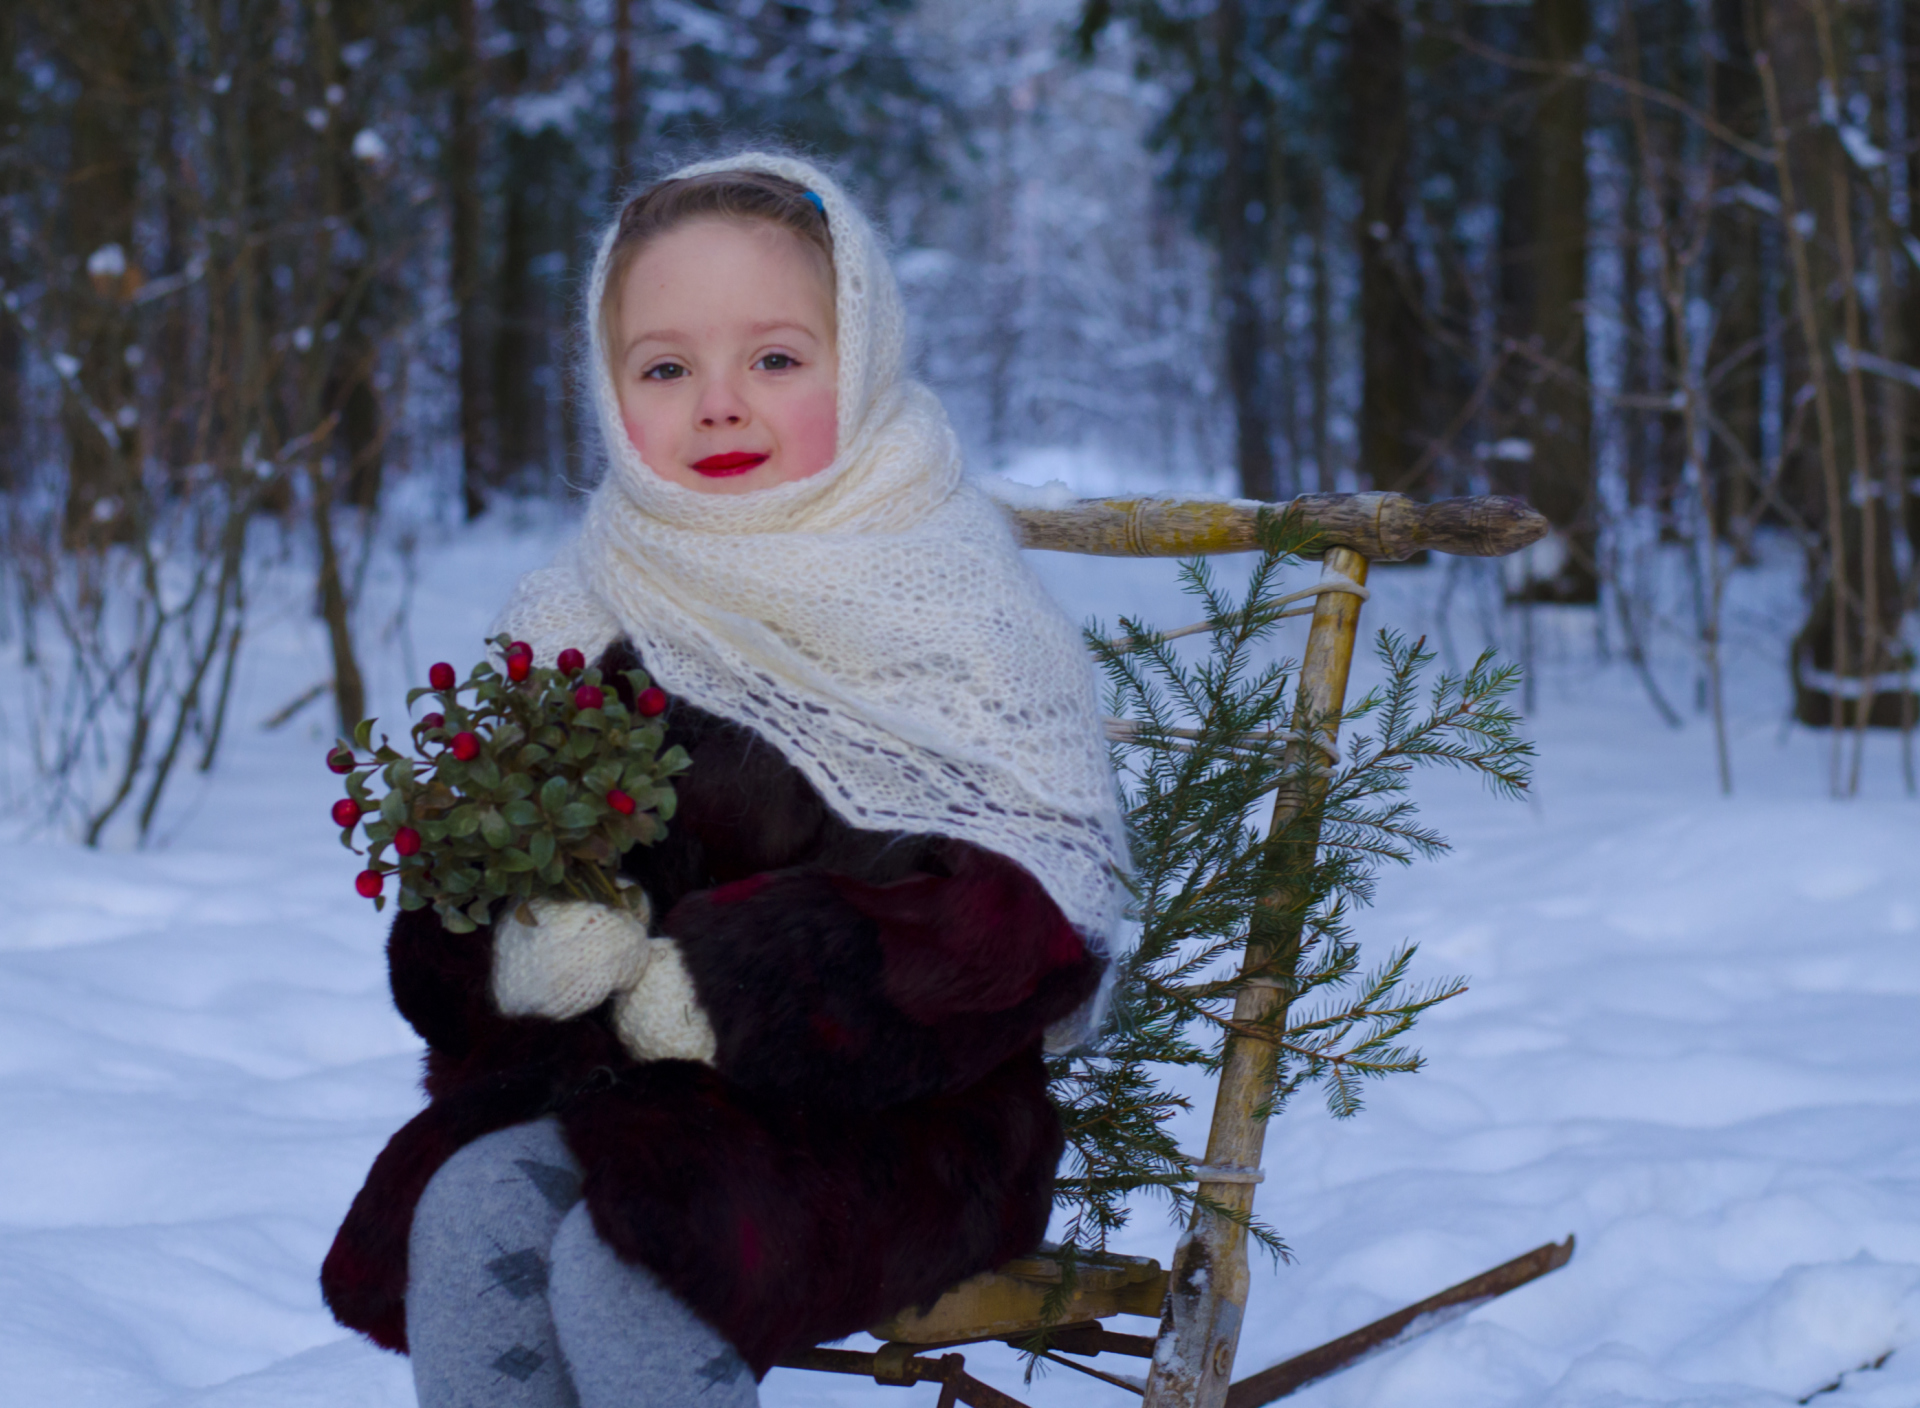 Little Girl In Winter Outfit wallpaper 1920x1408